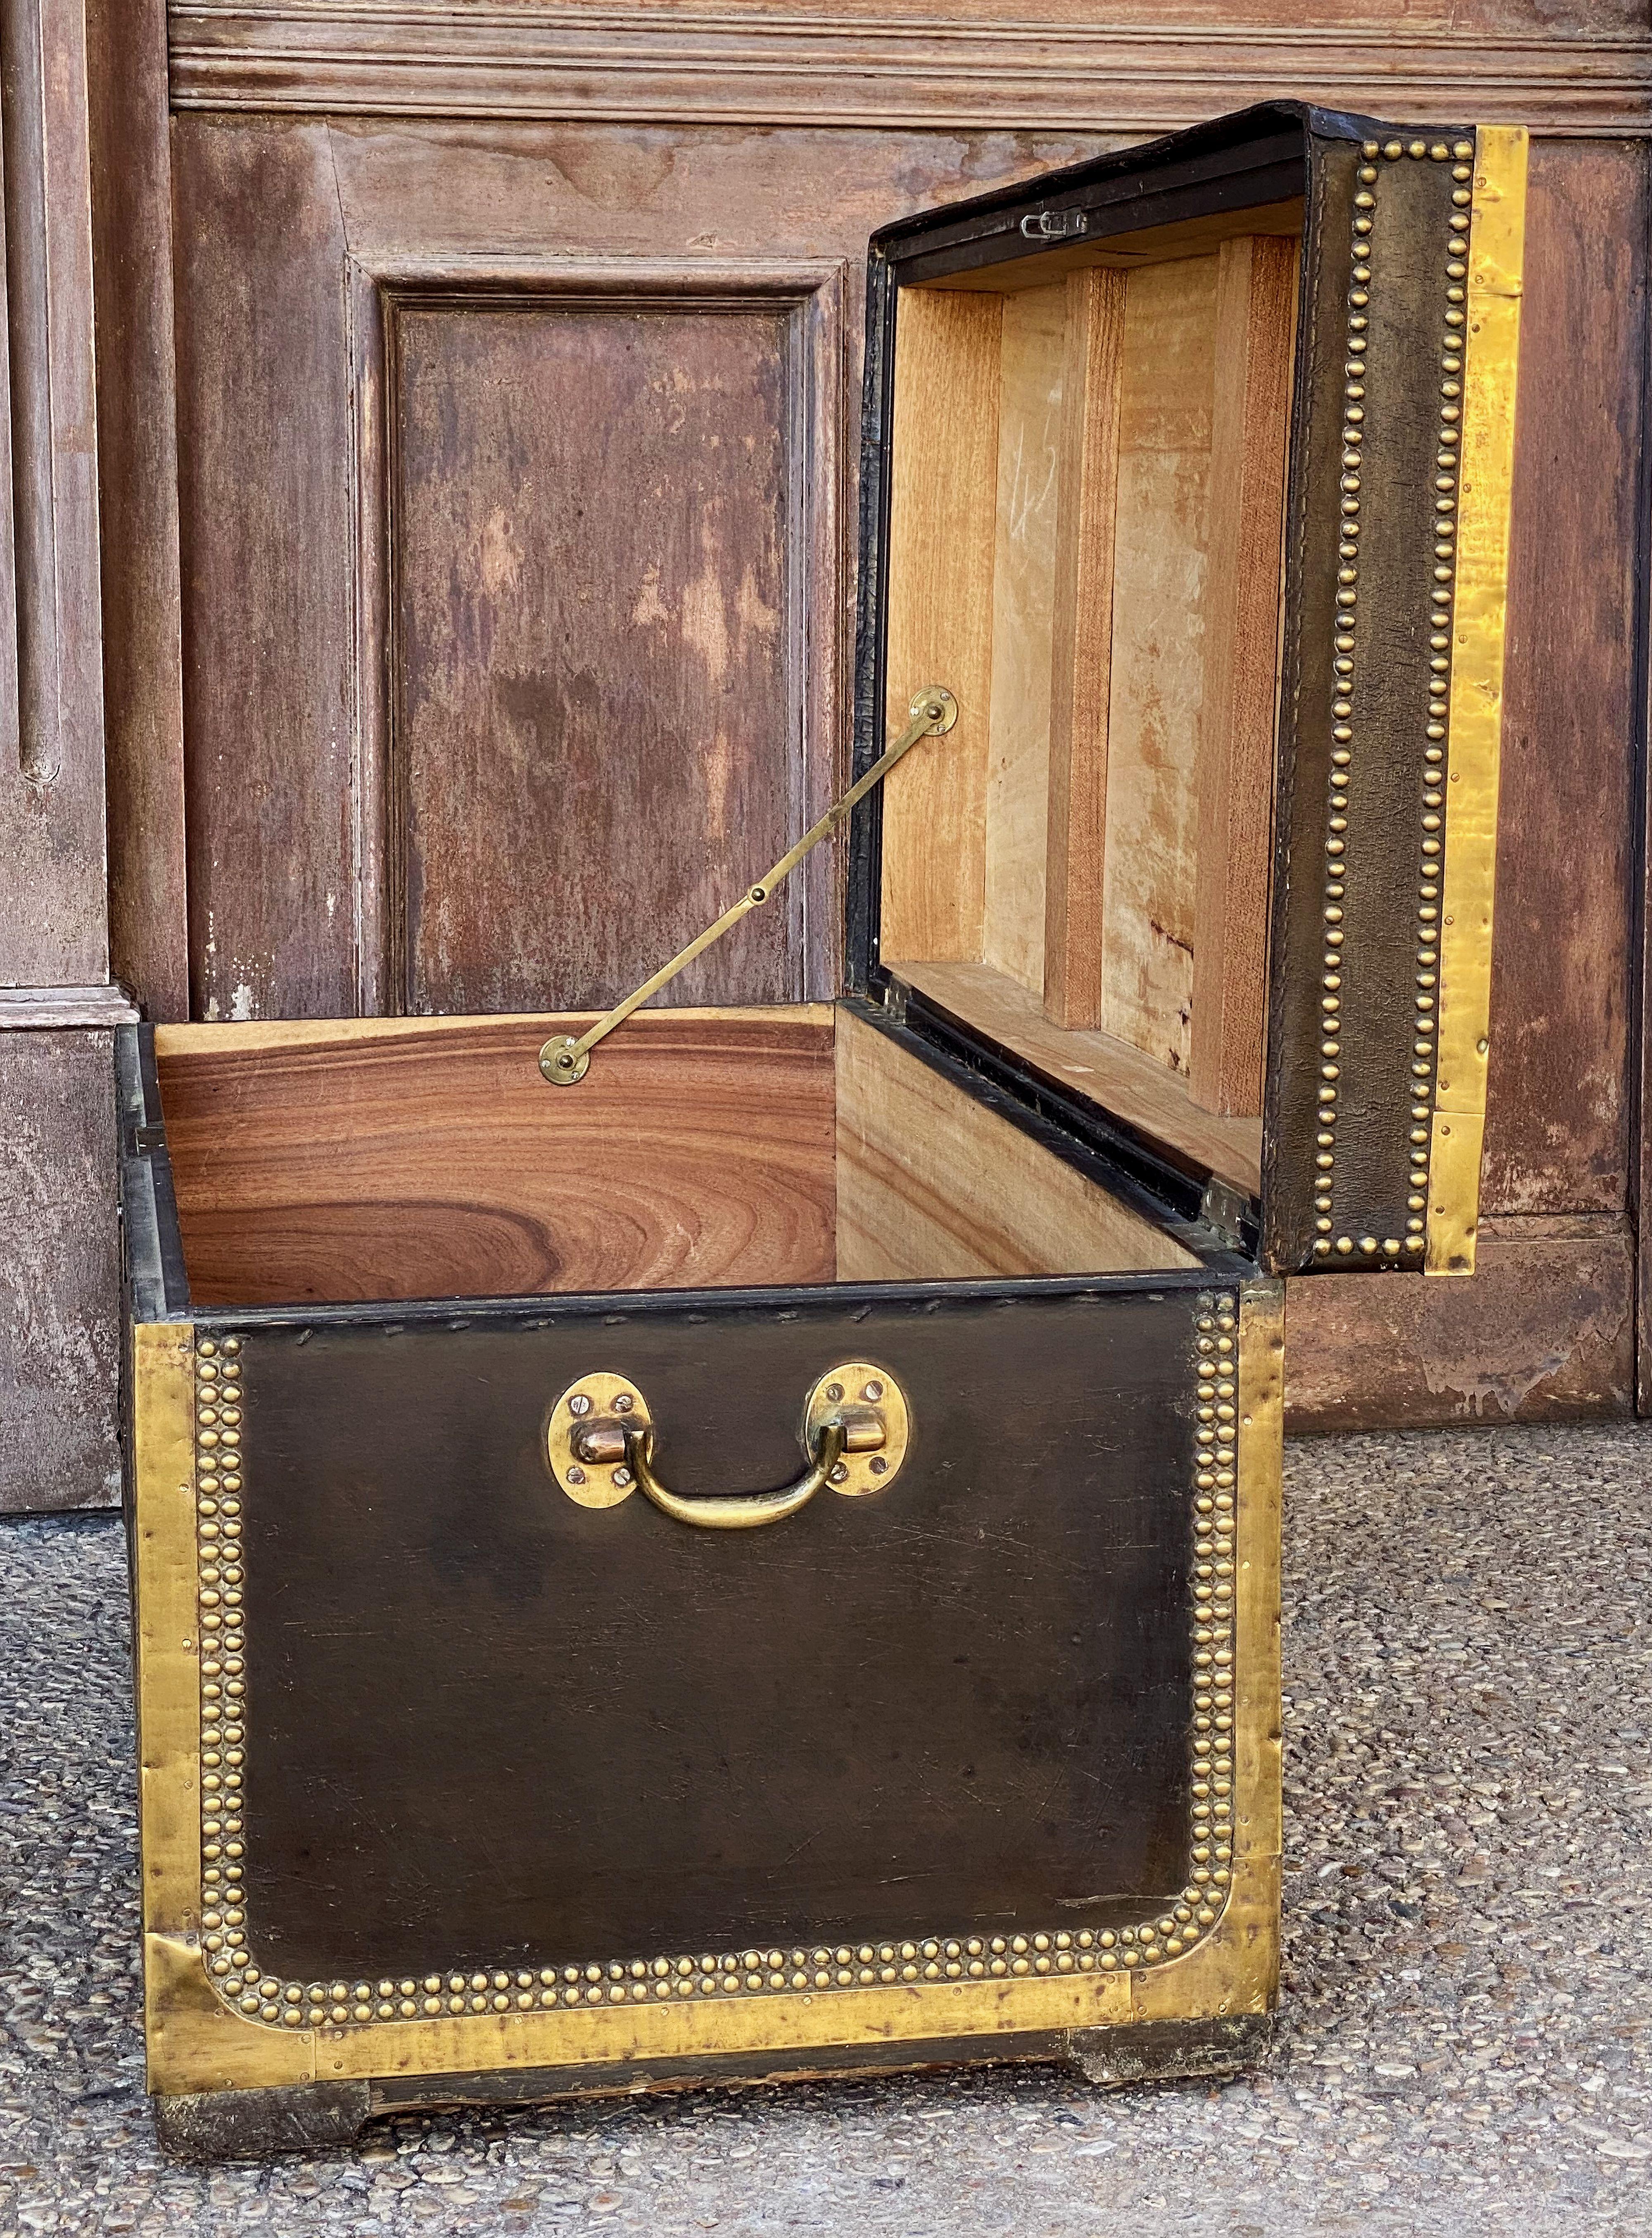 English Campaign Trunk of Brass-Bound Leather and Camphor Wood, Circa 1820 13